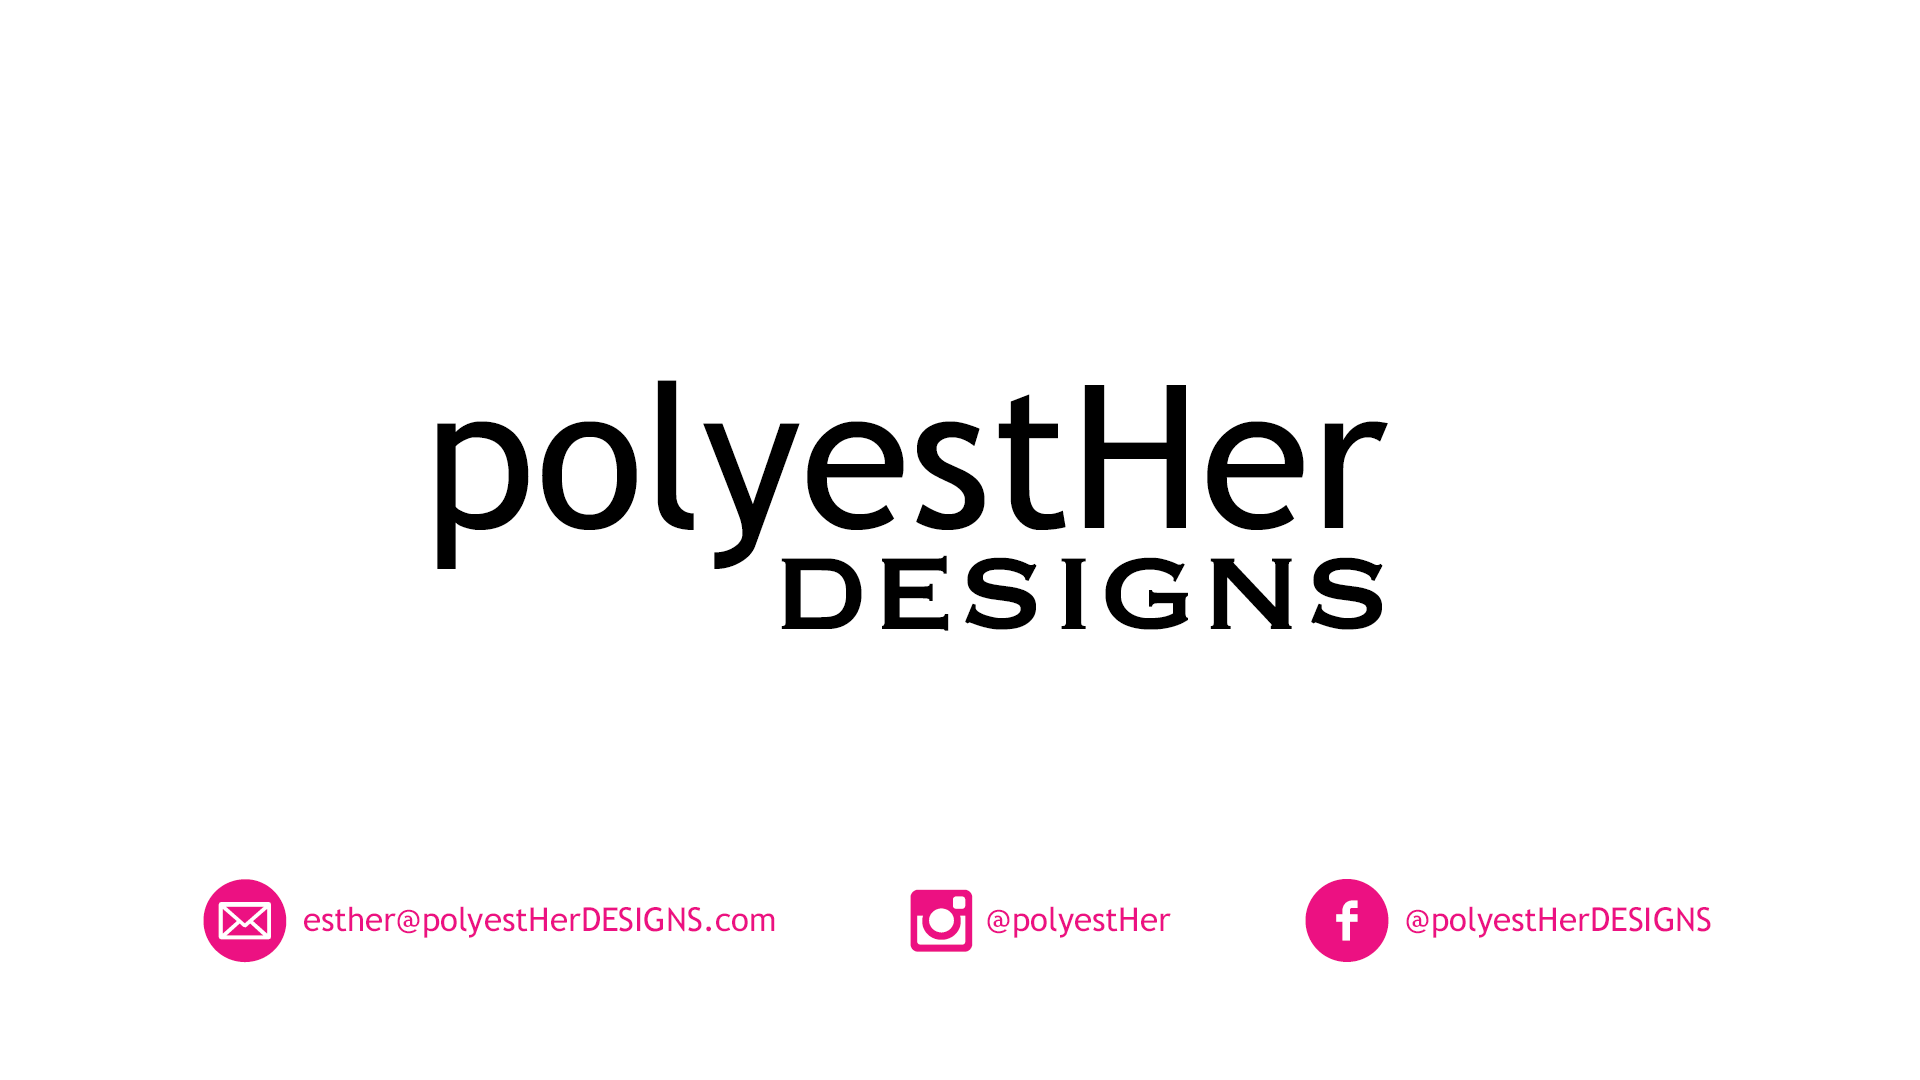 polyestHer DESIGNS